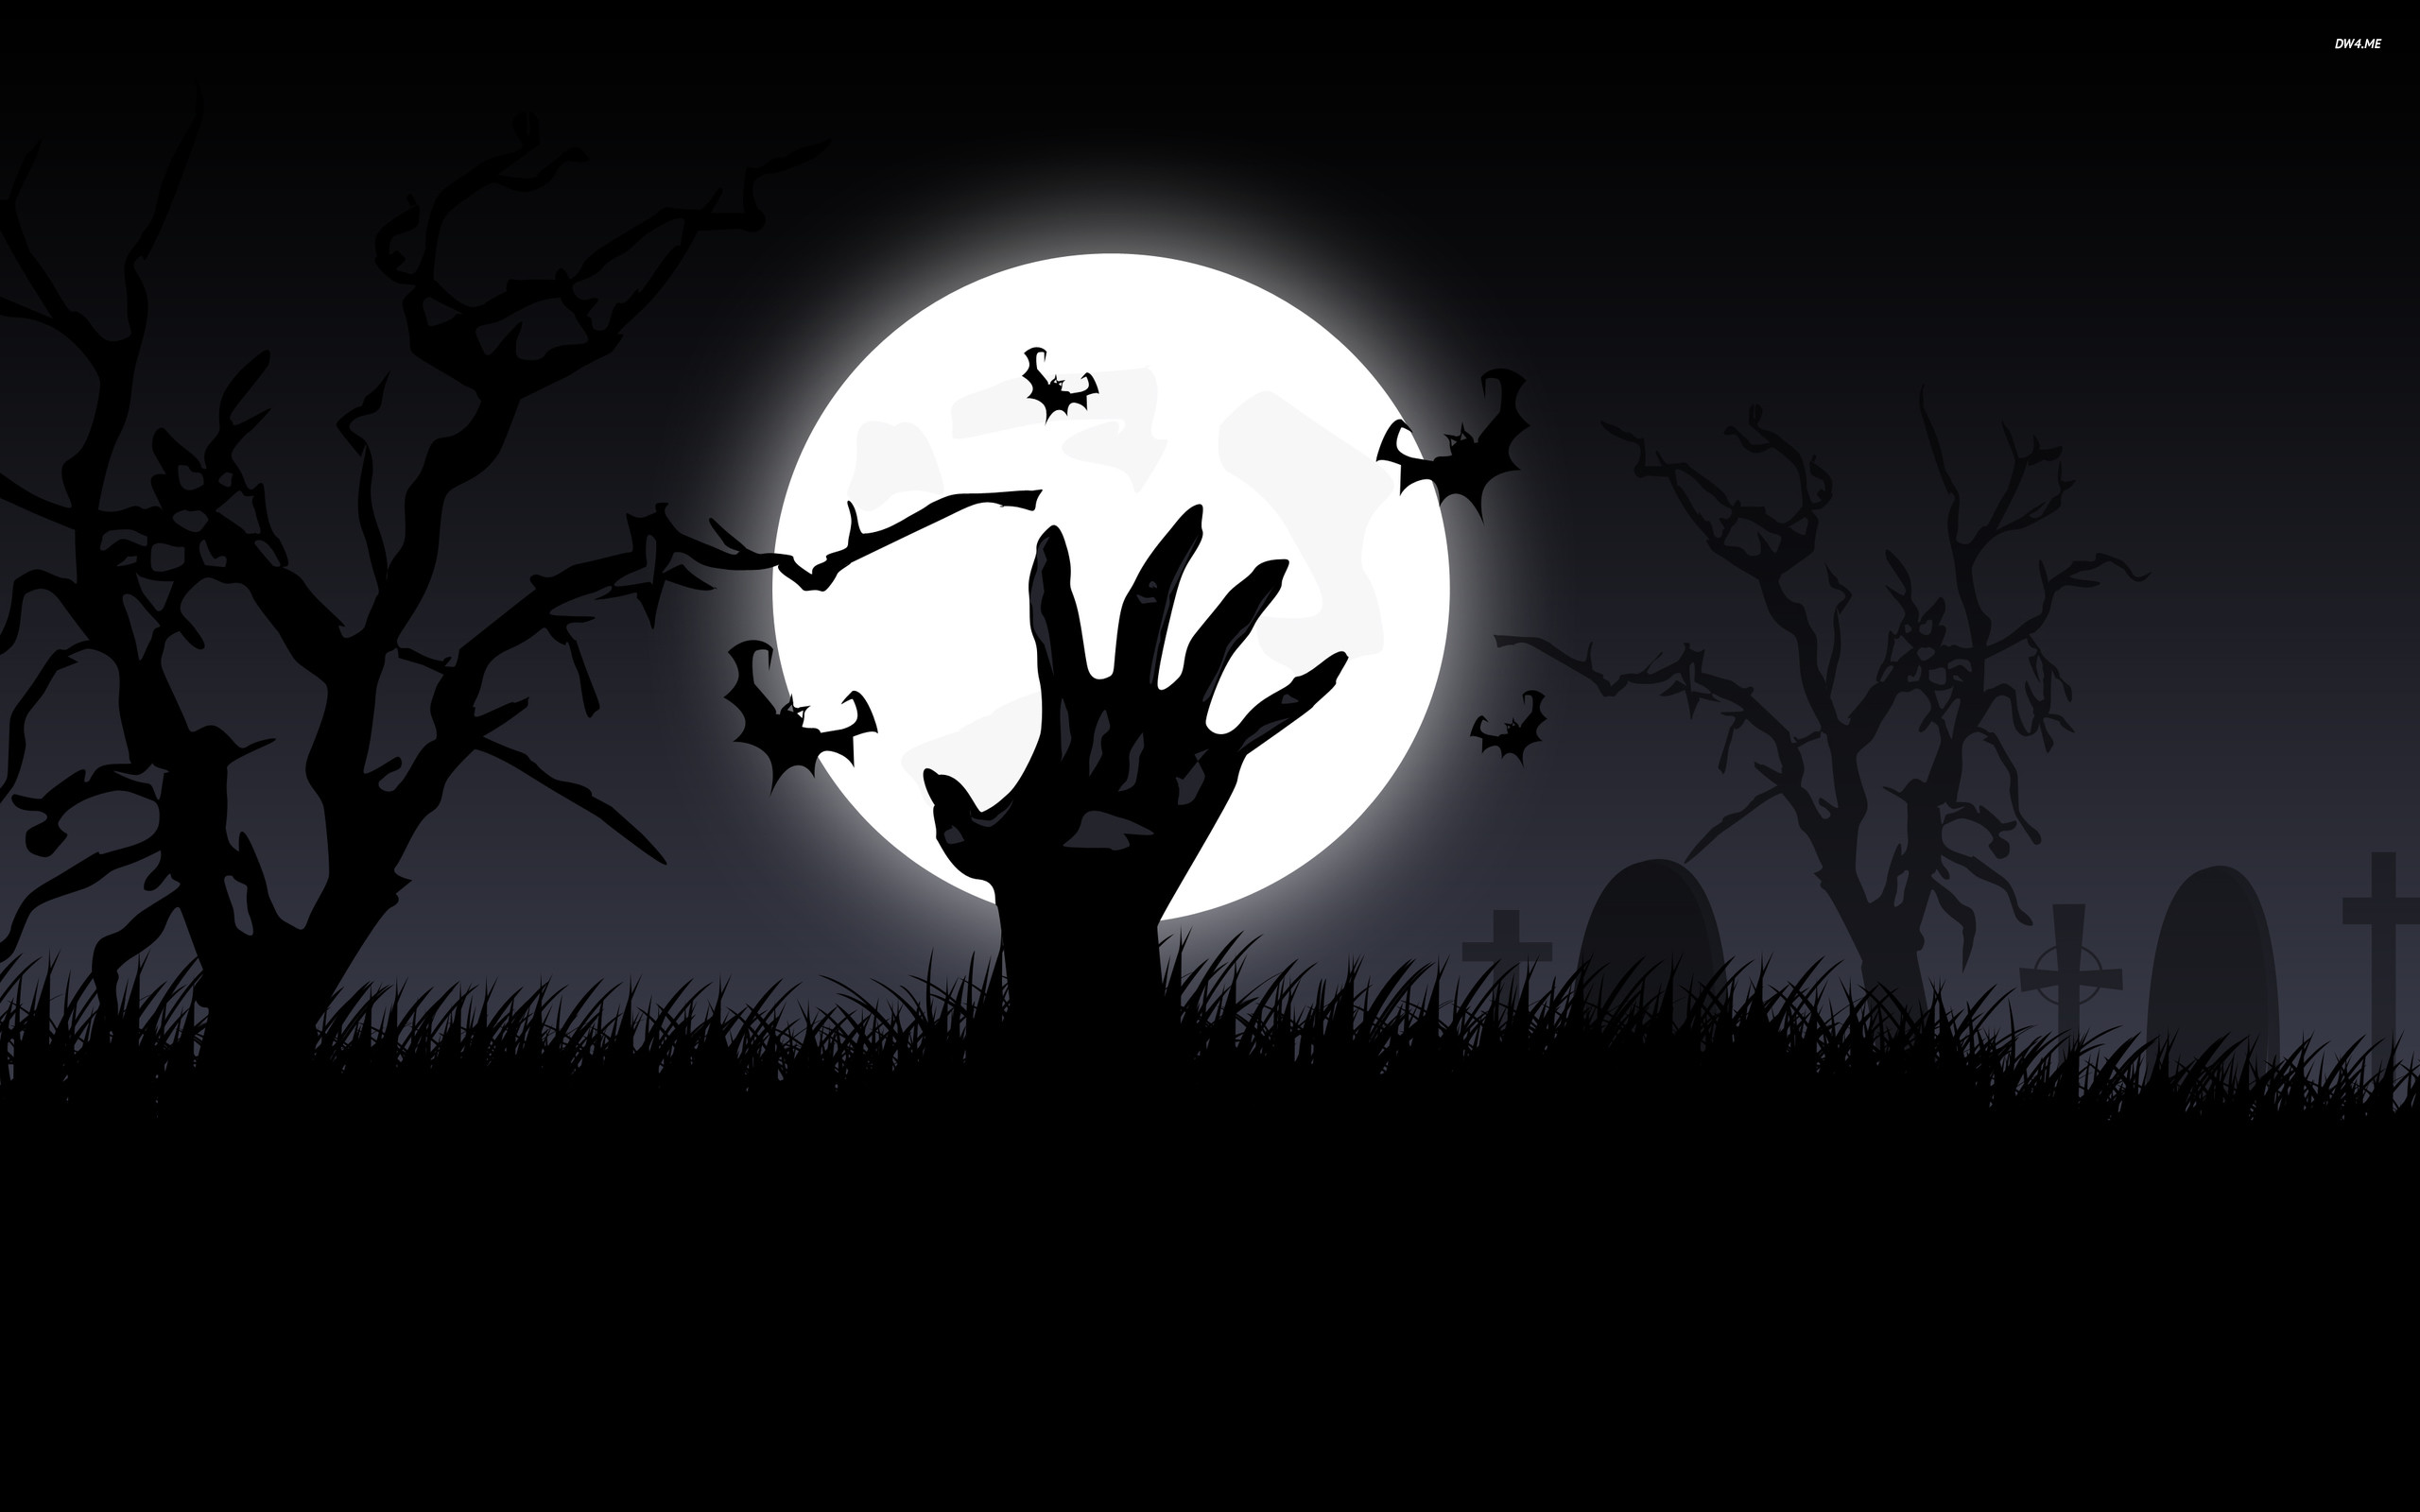 Zombie hand in the moonlight wallpaper – Holiday